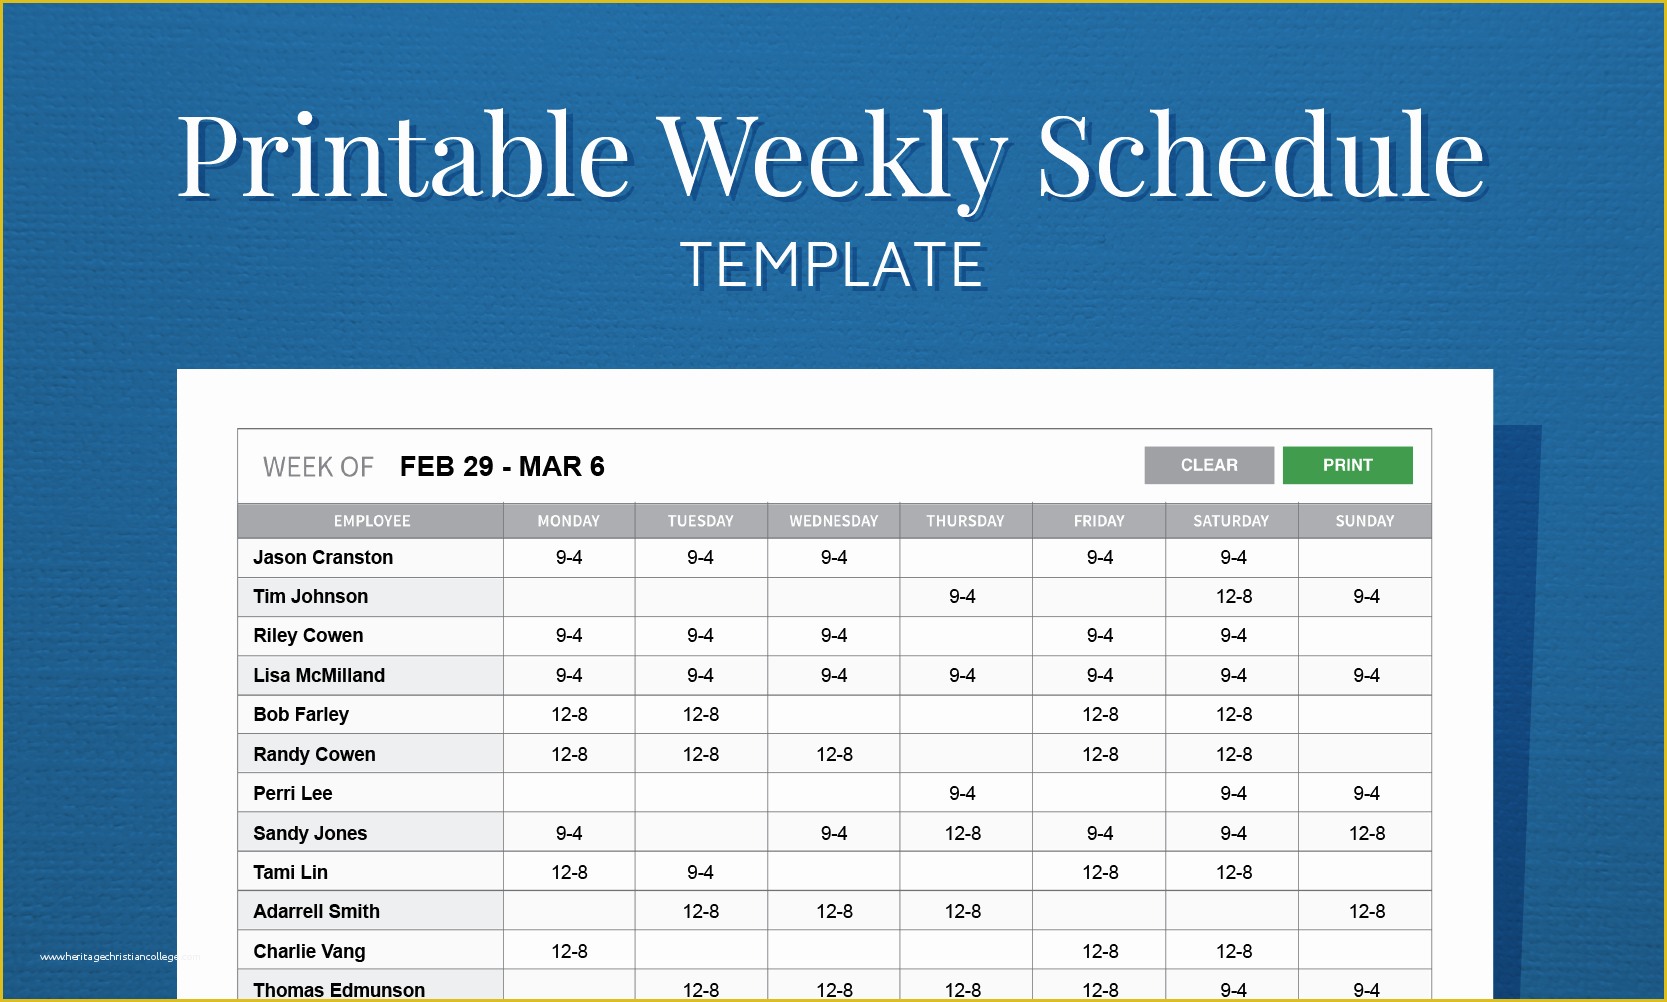 Schedule Template Free Download Of Free Printable Weekly Work Schedule Template for Employee